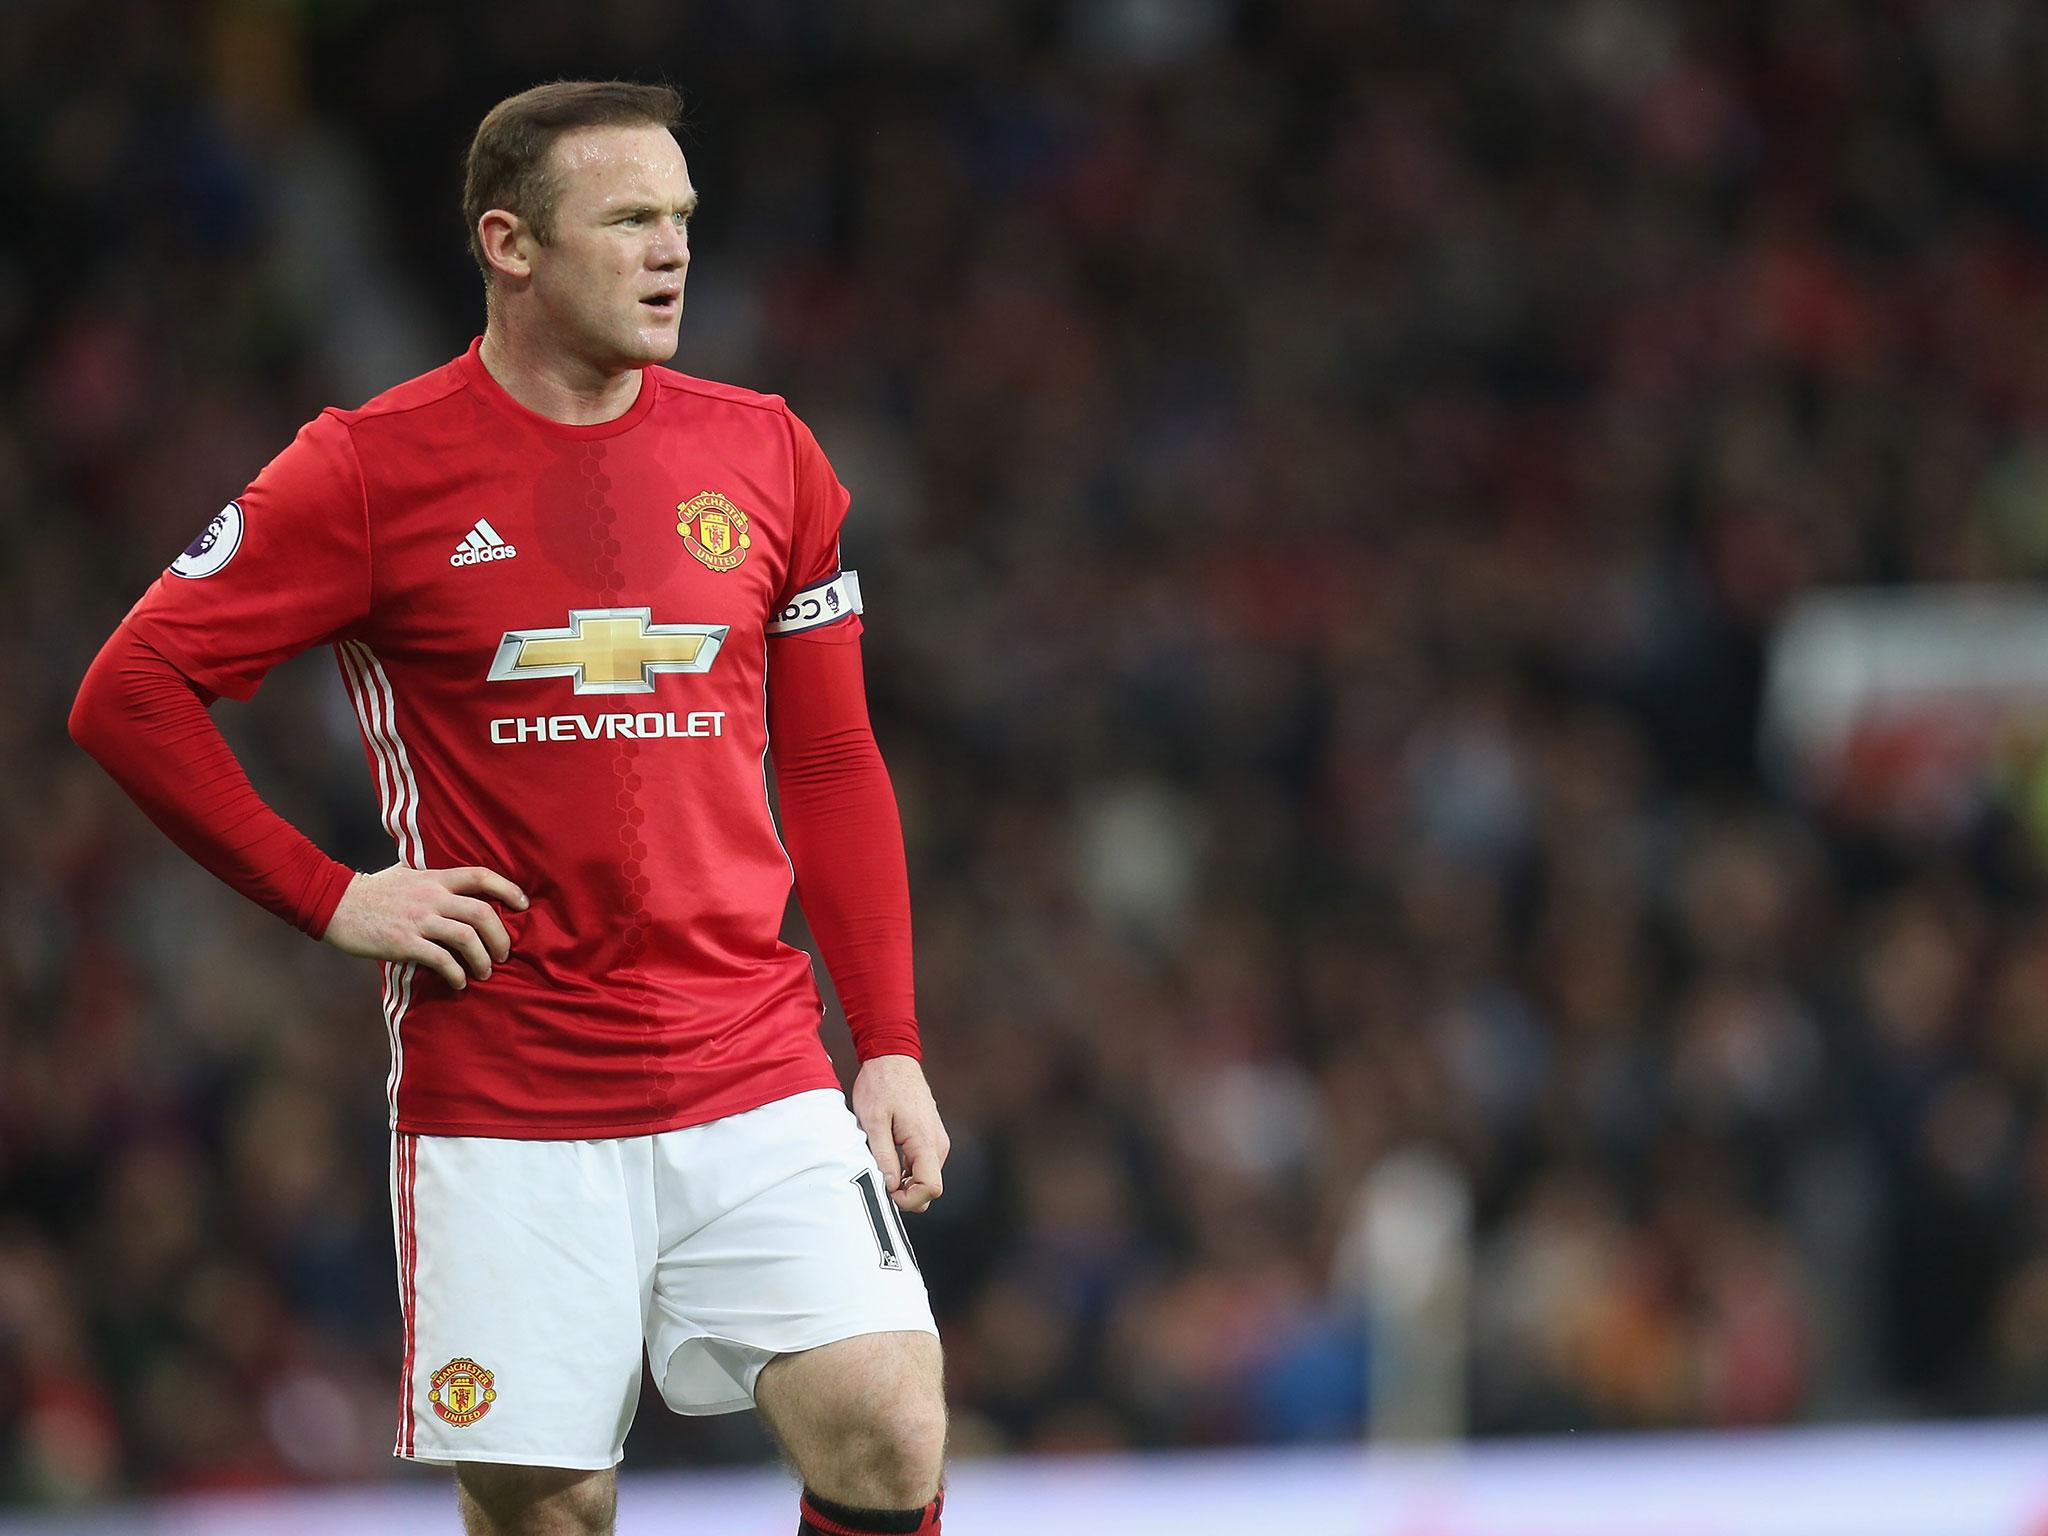 Despite rumours linking Rooney with a move away from Old Trafford, the 31-year-old has insisted he will fight for his spot at United